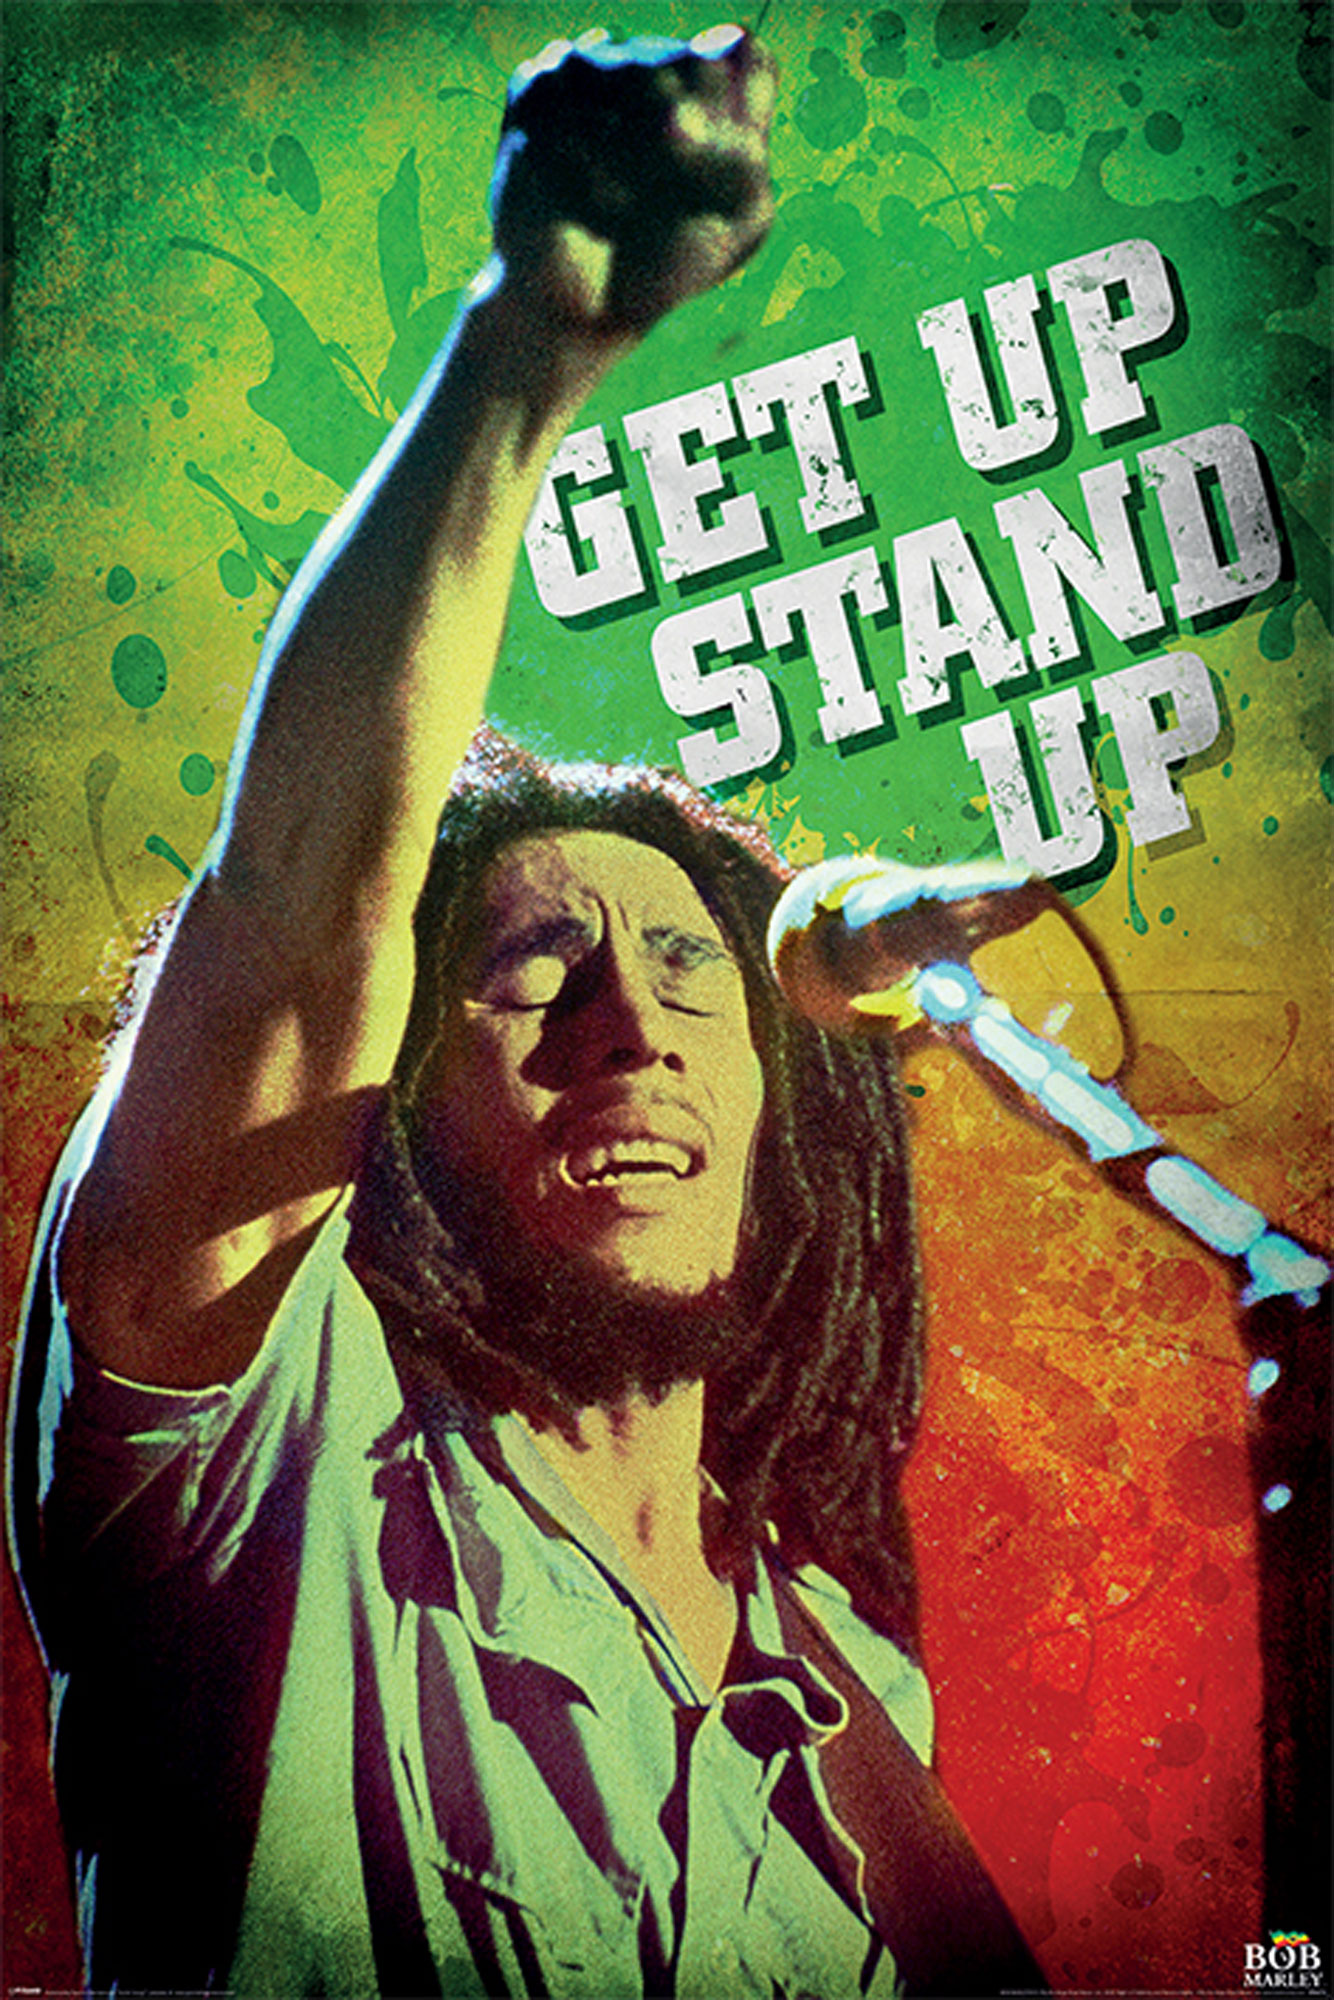 Bob - Up Marley, Stand Up Get